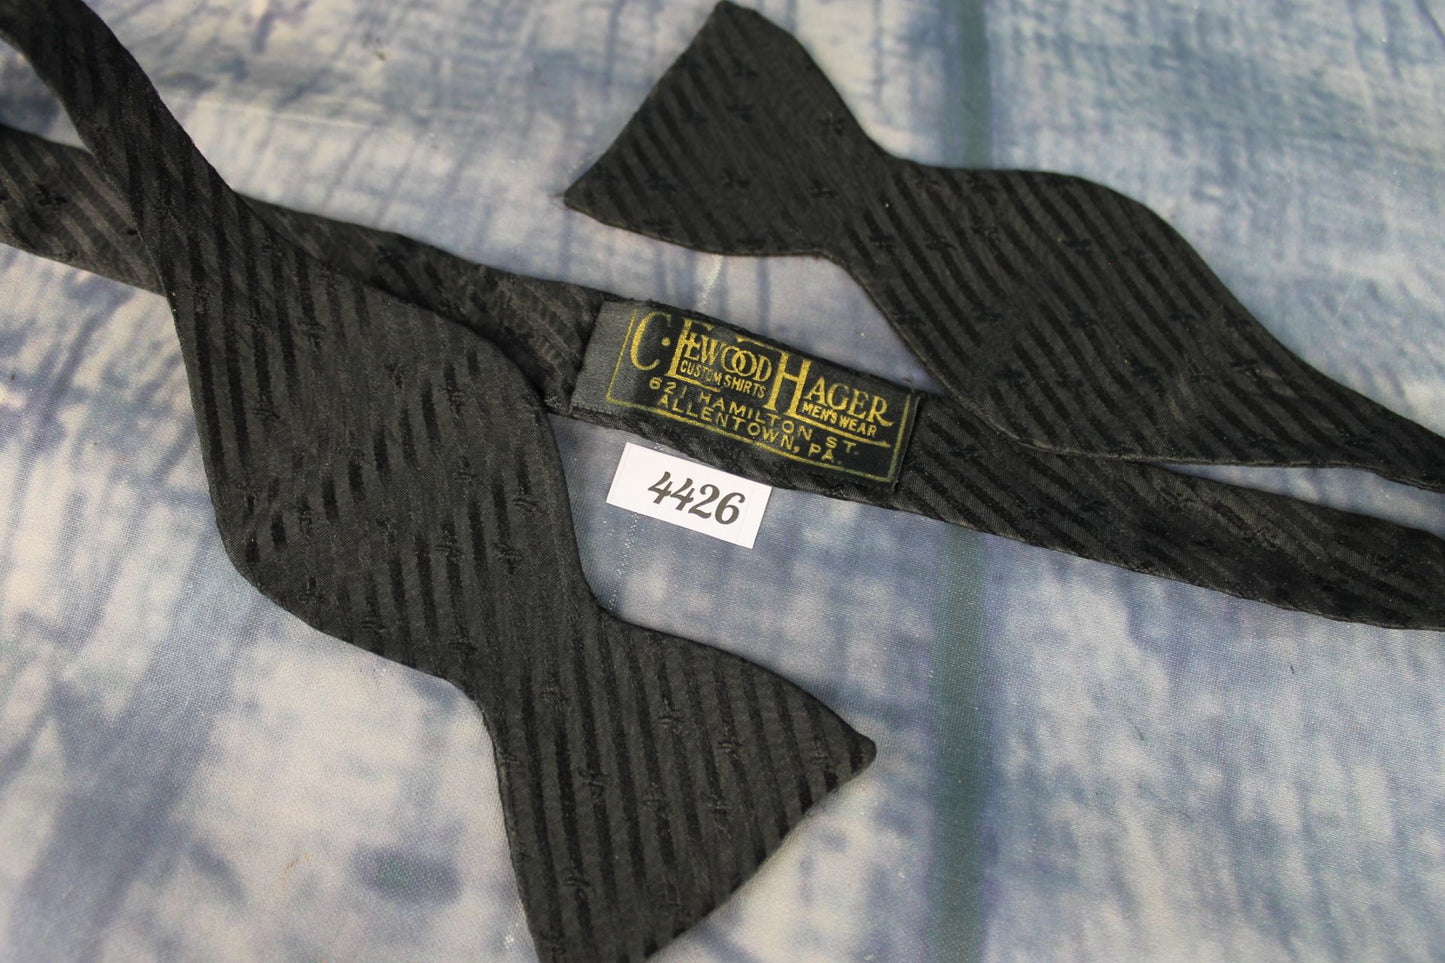 Superb Vintage Childs Small Classic Black Striped Self Tie Bow Tie Straight End Thistle